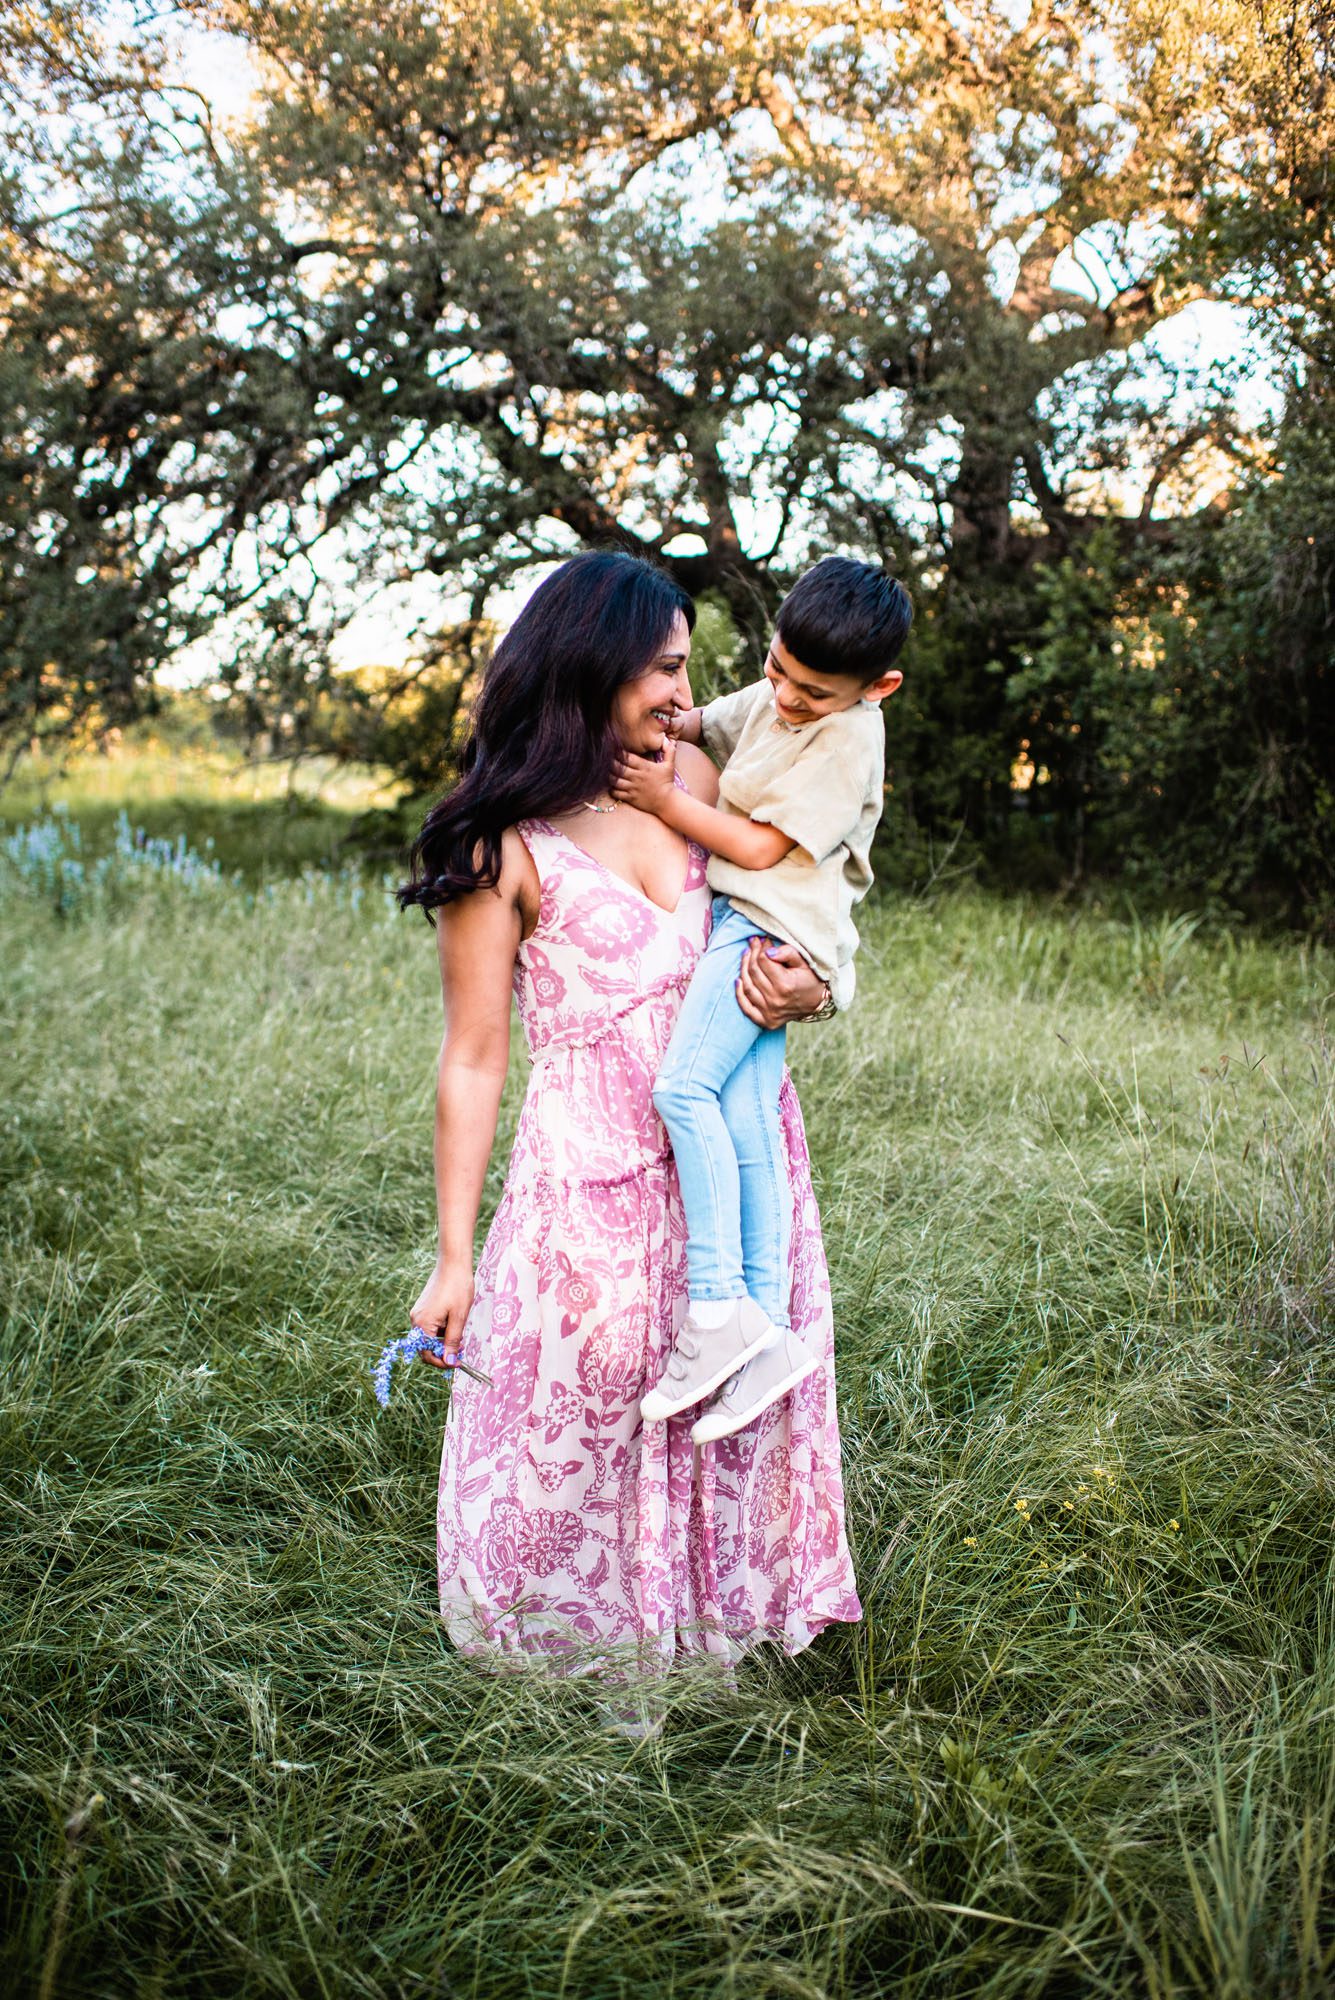 Mother and son hugging in grassy field with wildfowers, San Antonio family photographer